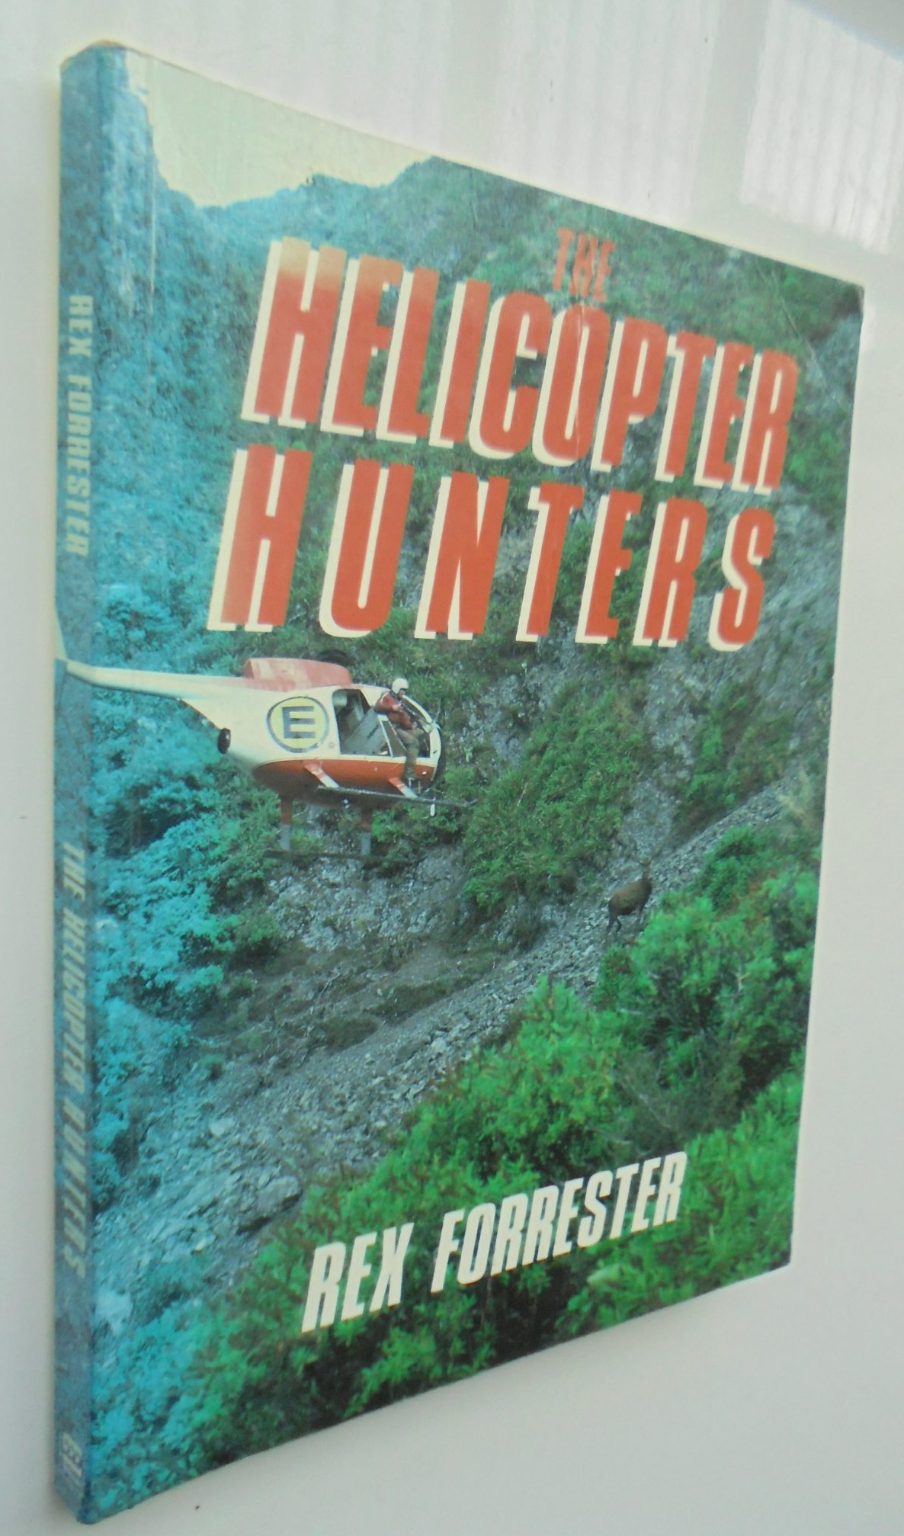 The Helicopter Hunters by Rex Forrester. first Edition. SCARCE.